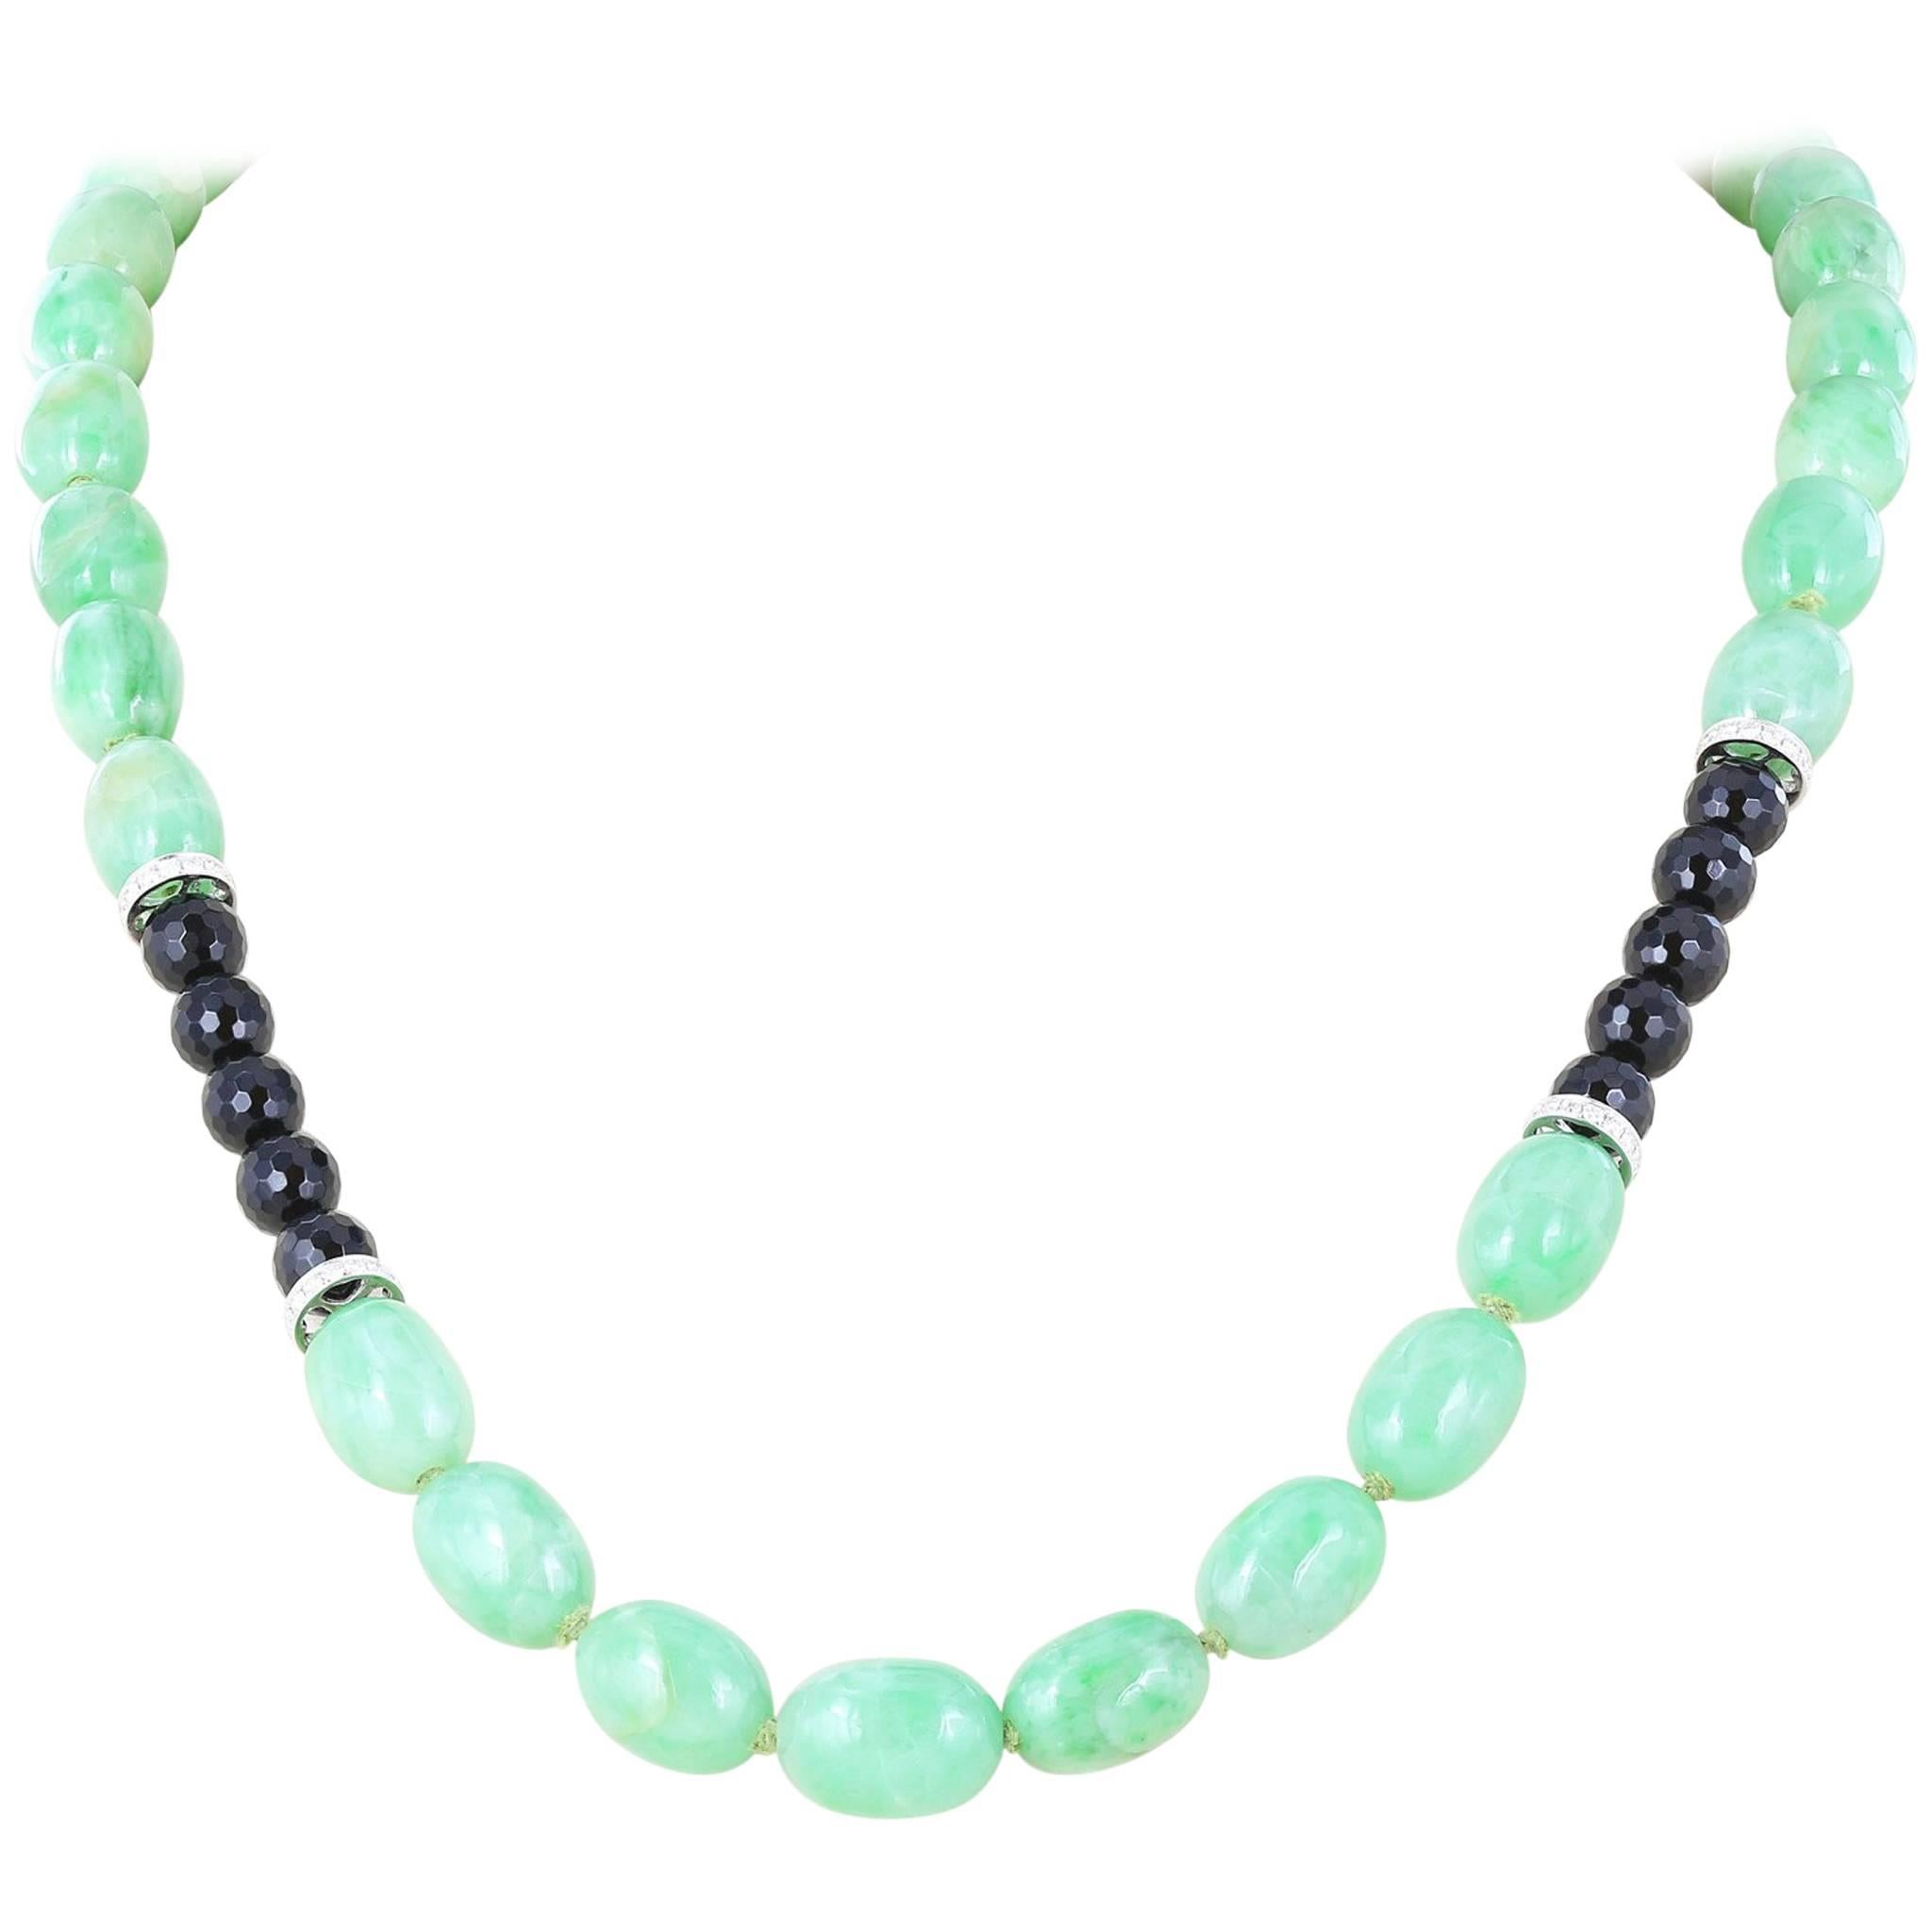  917.09 Carat Certified Type A Jade Necklace For Sale